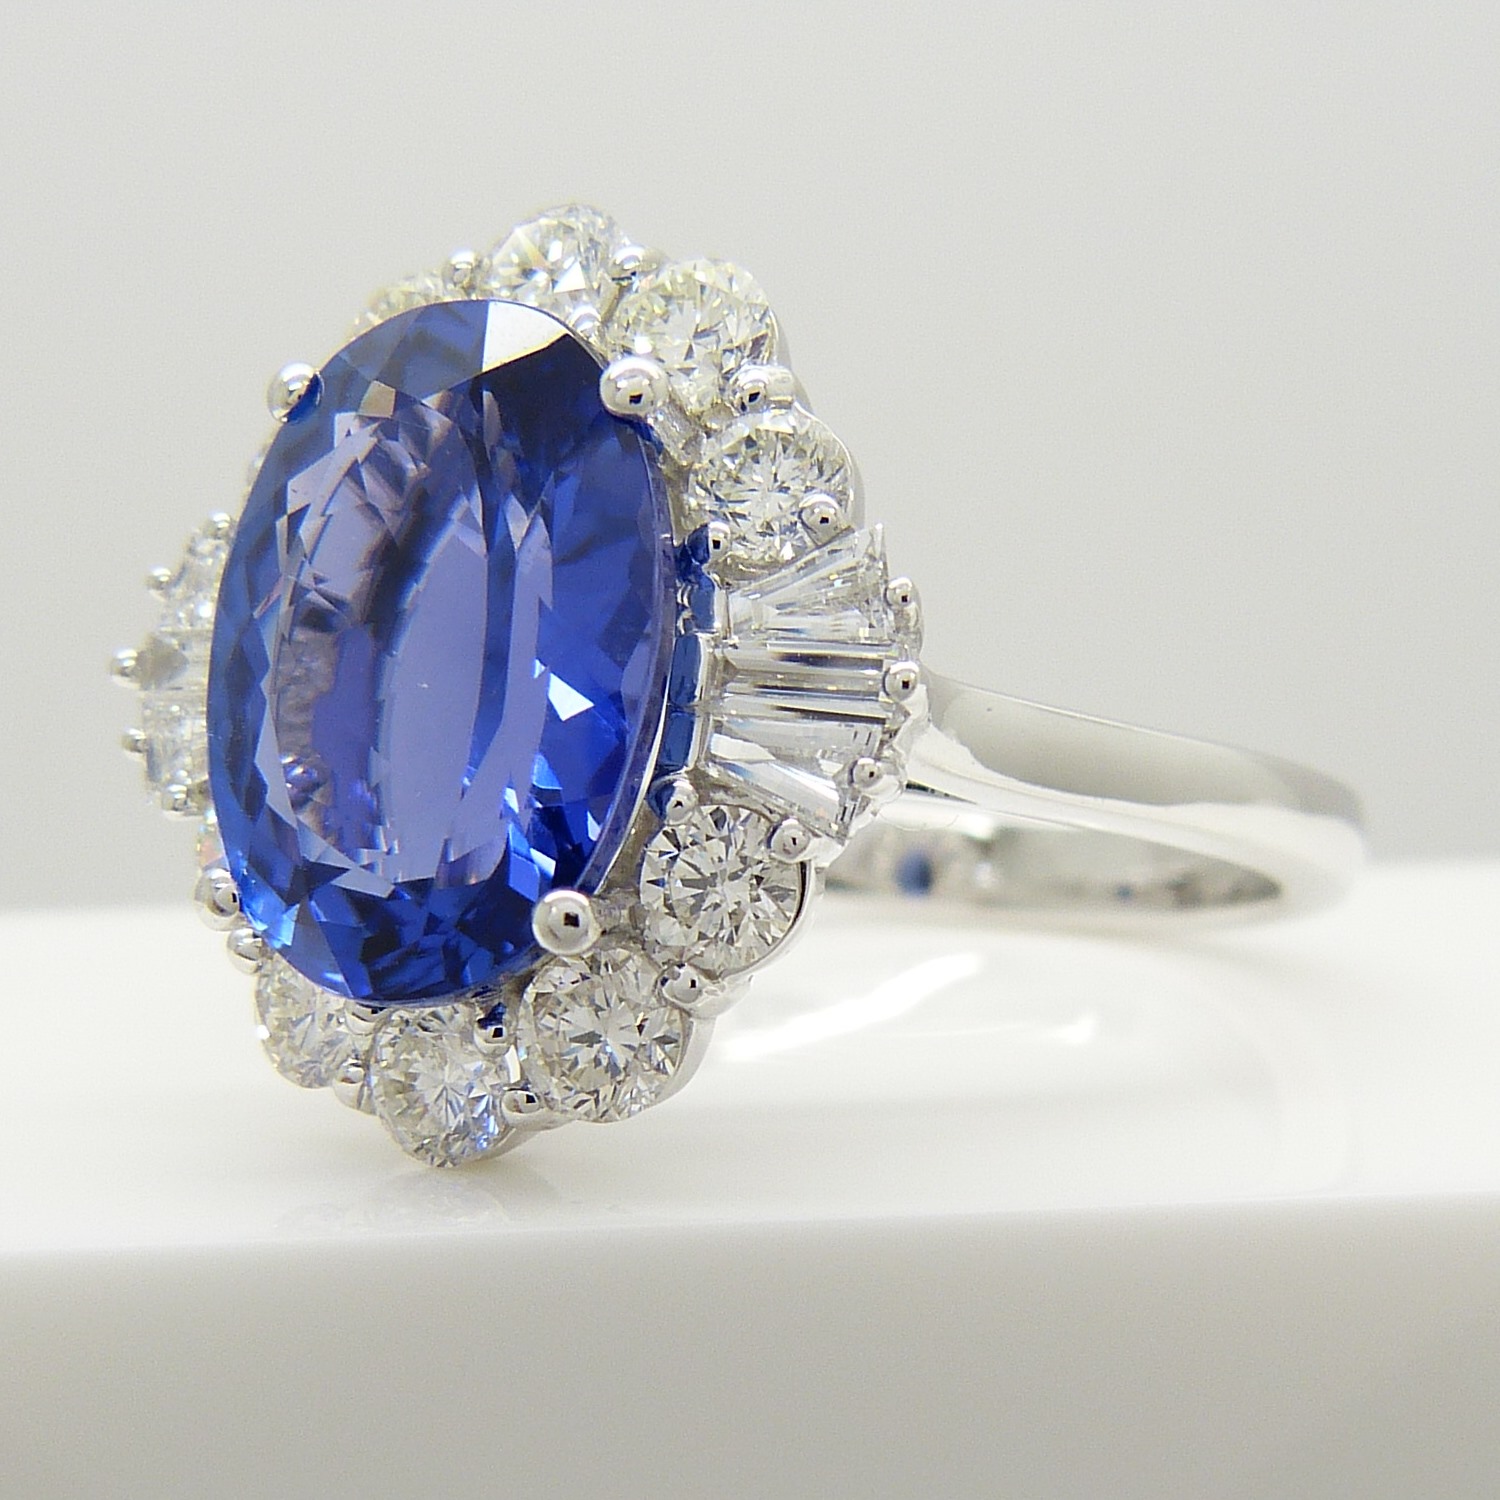 A stunning, certificated loupe-clean large tanzanite and diamond statement ring in 18ct white gold - Image 4 of 9